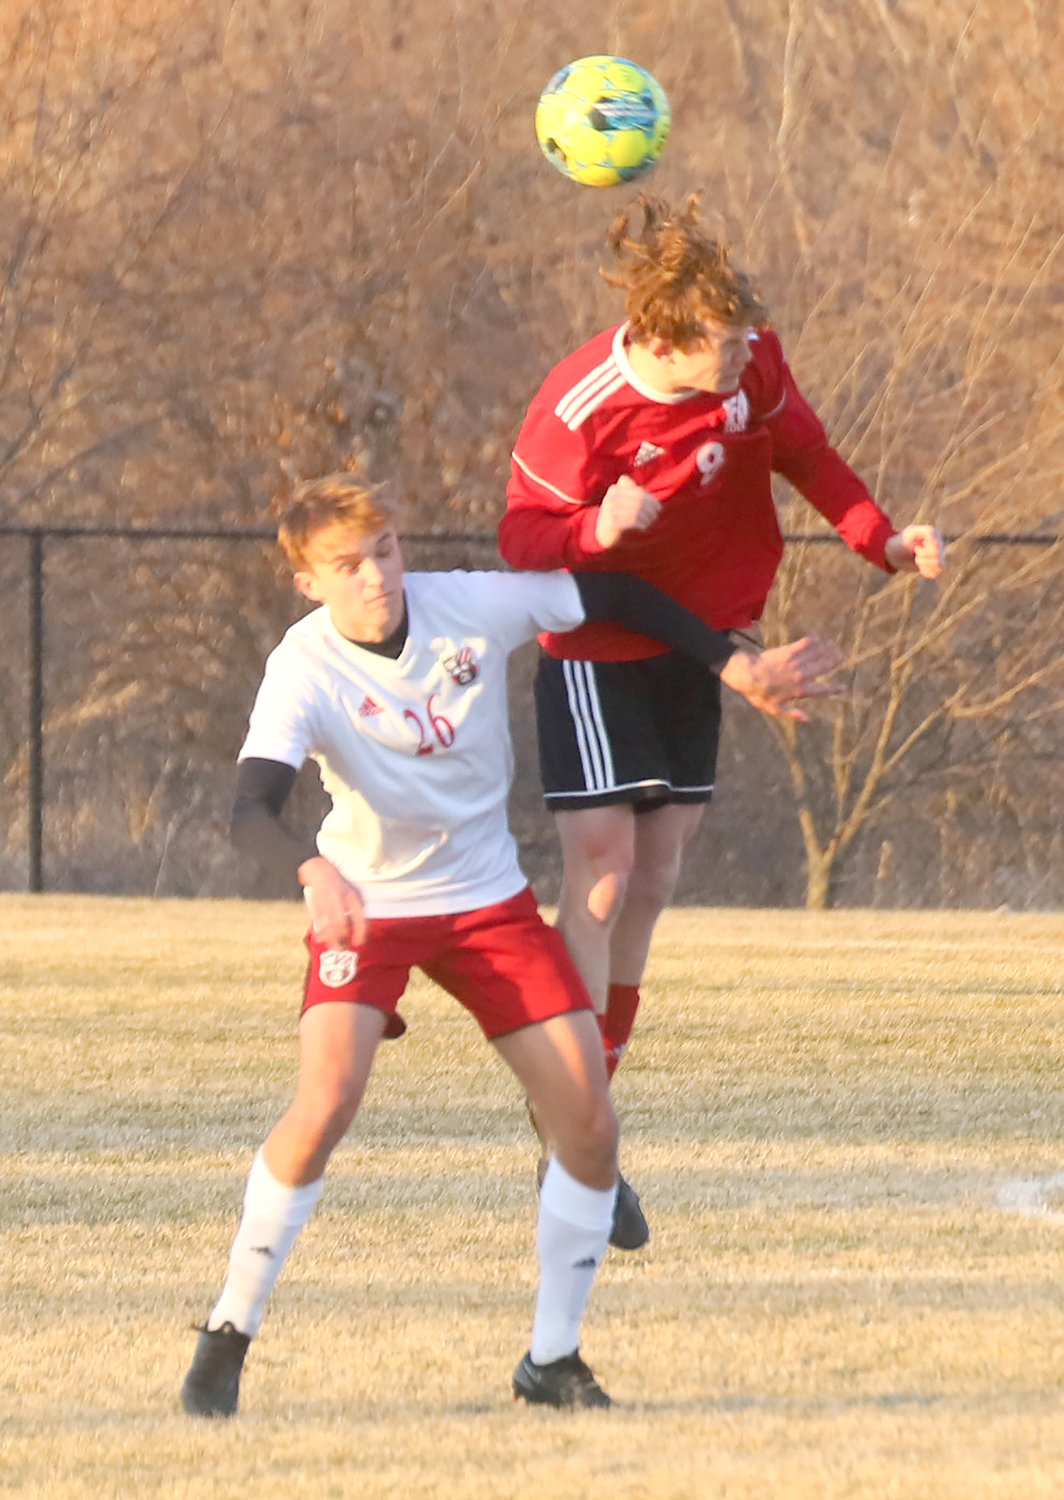 Defenseman Noah Swigart gets a header on a deep ball into the Hounds' side of the pitch Tuesday in Fort Madison.